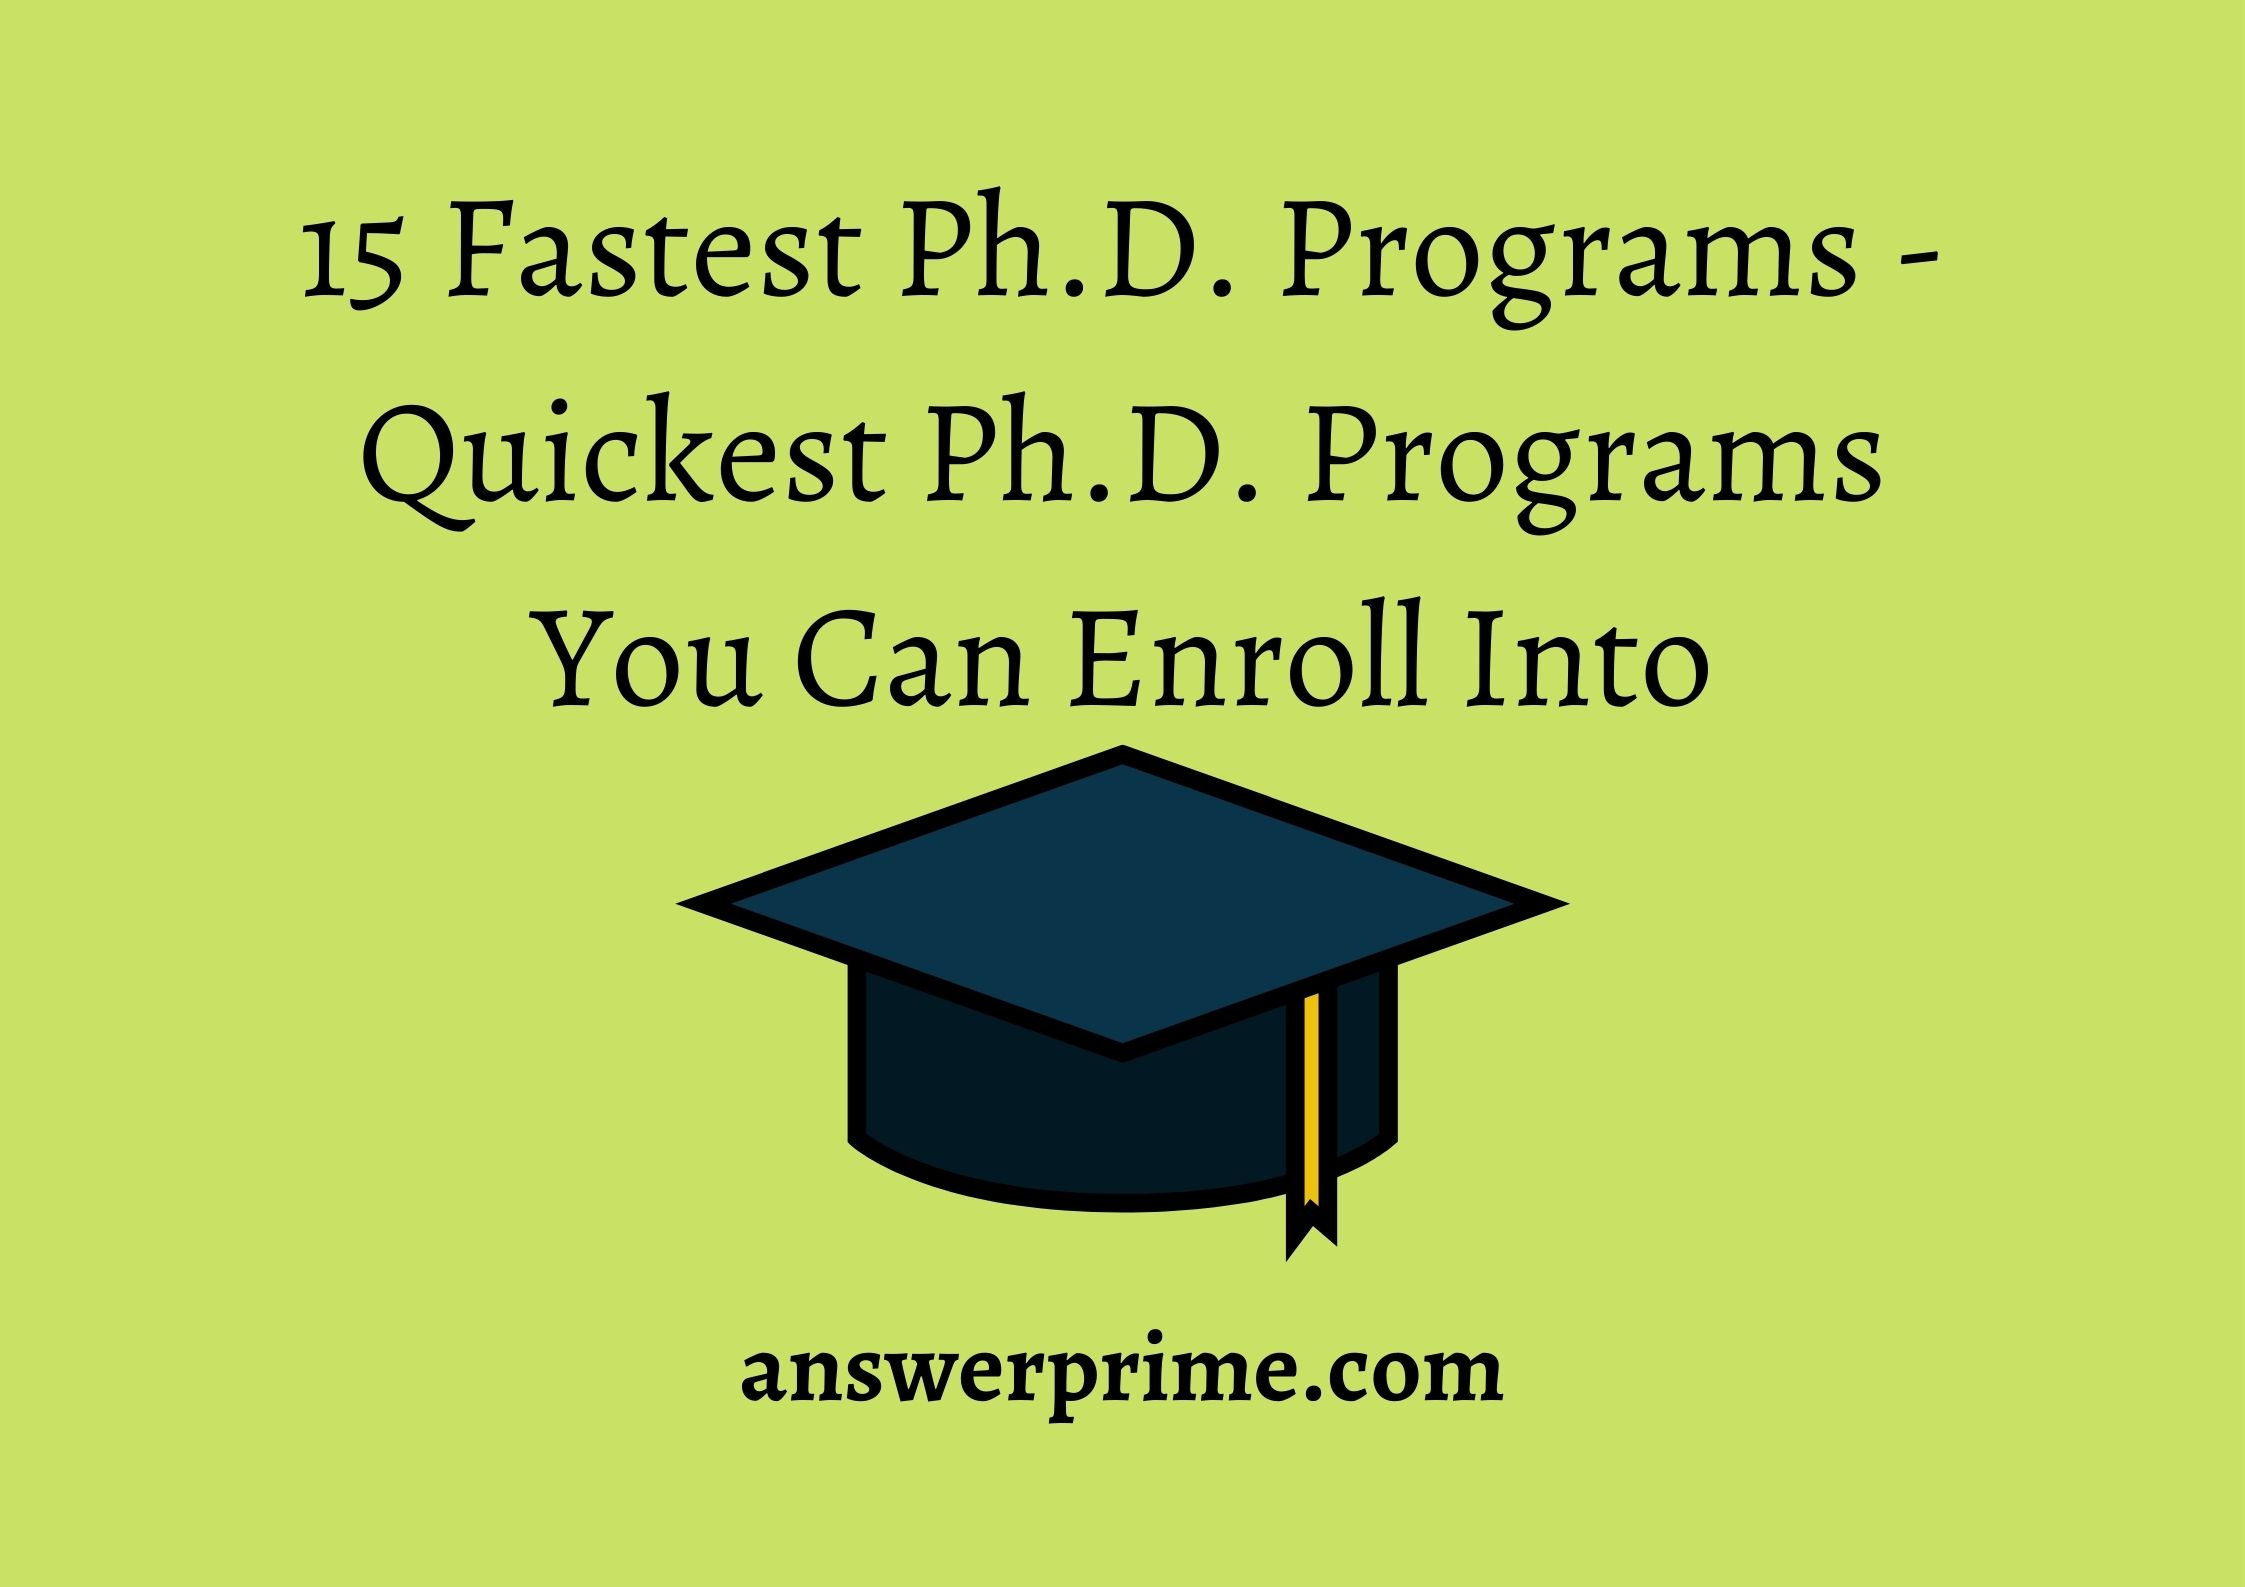 15 Fastest Ph.D. Programs - Quickest Ph.D. Programs you can enroll into